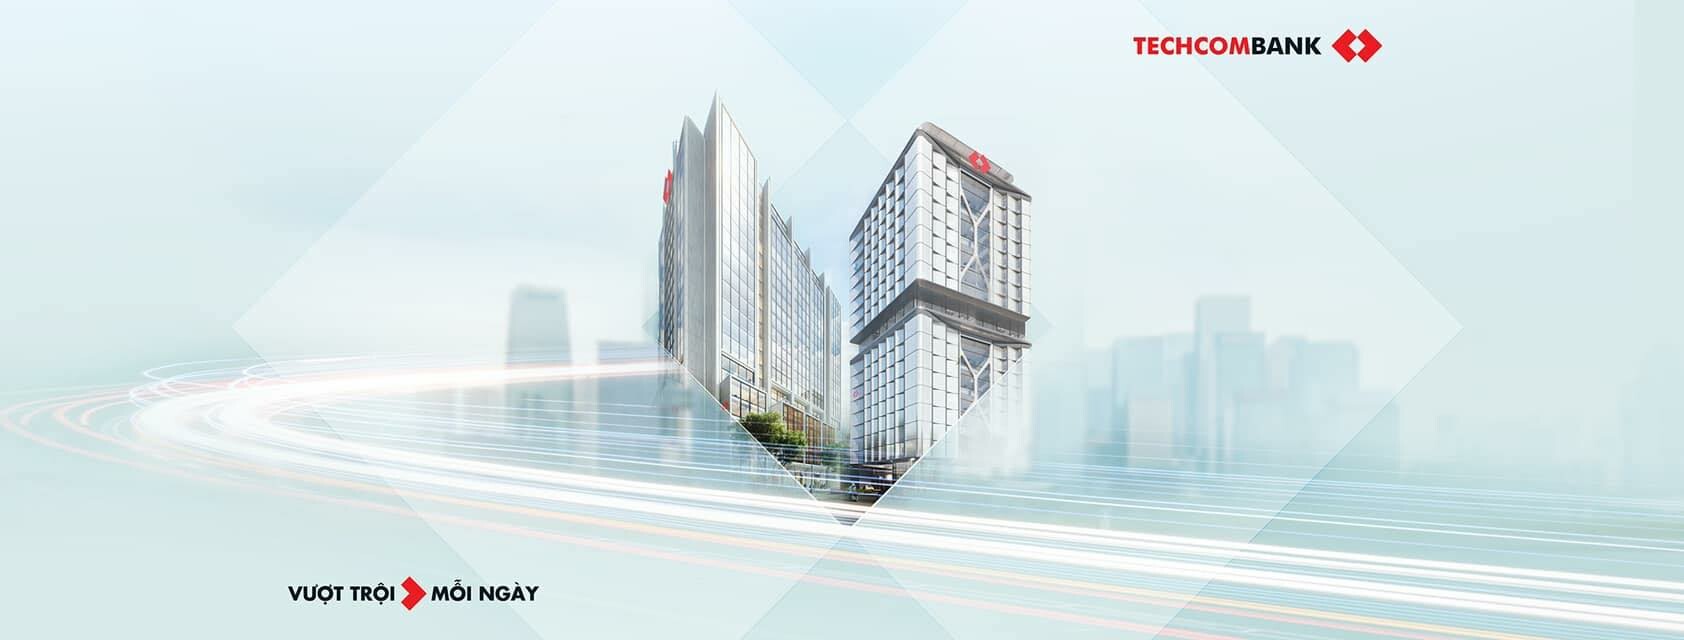 Cover image for Techcombank